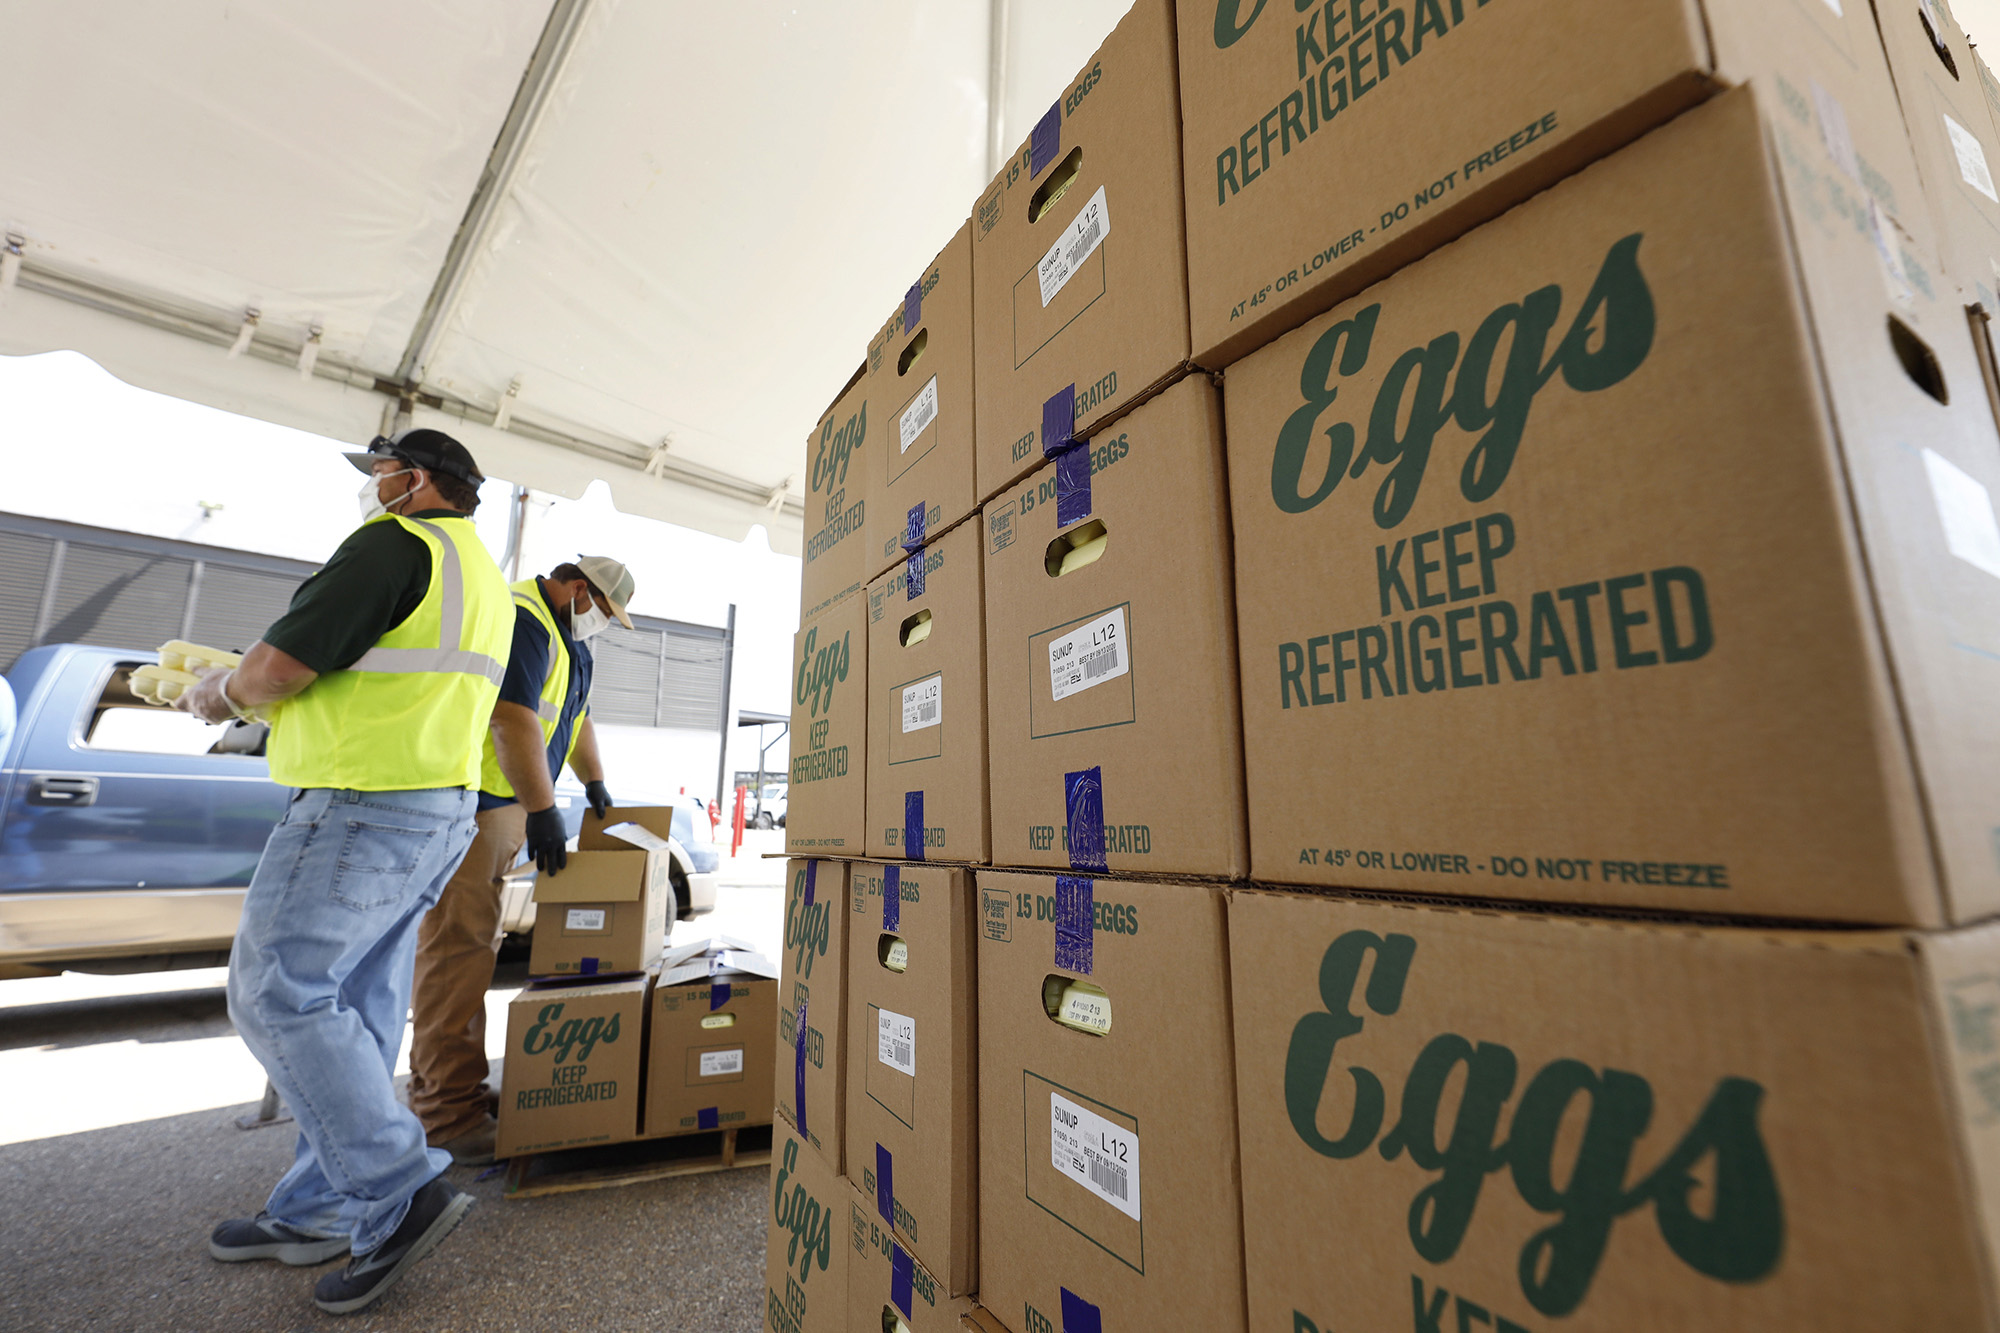 Cases of eggs from Cal-Maine Foods, Inc., await to be handed out by the Mississippi Department of Agriculture and Commerce employees at the Mississippi State Fairgrounds in Jackson, Miss., on Aug. 7, 2020.